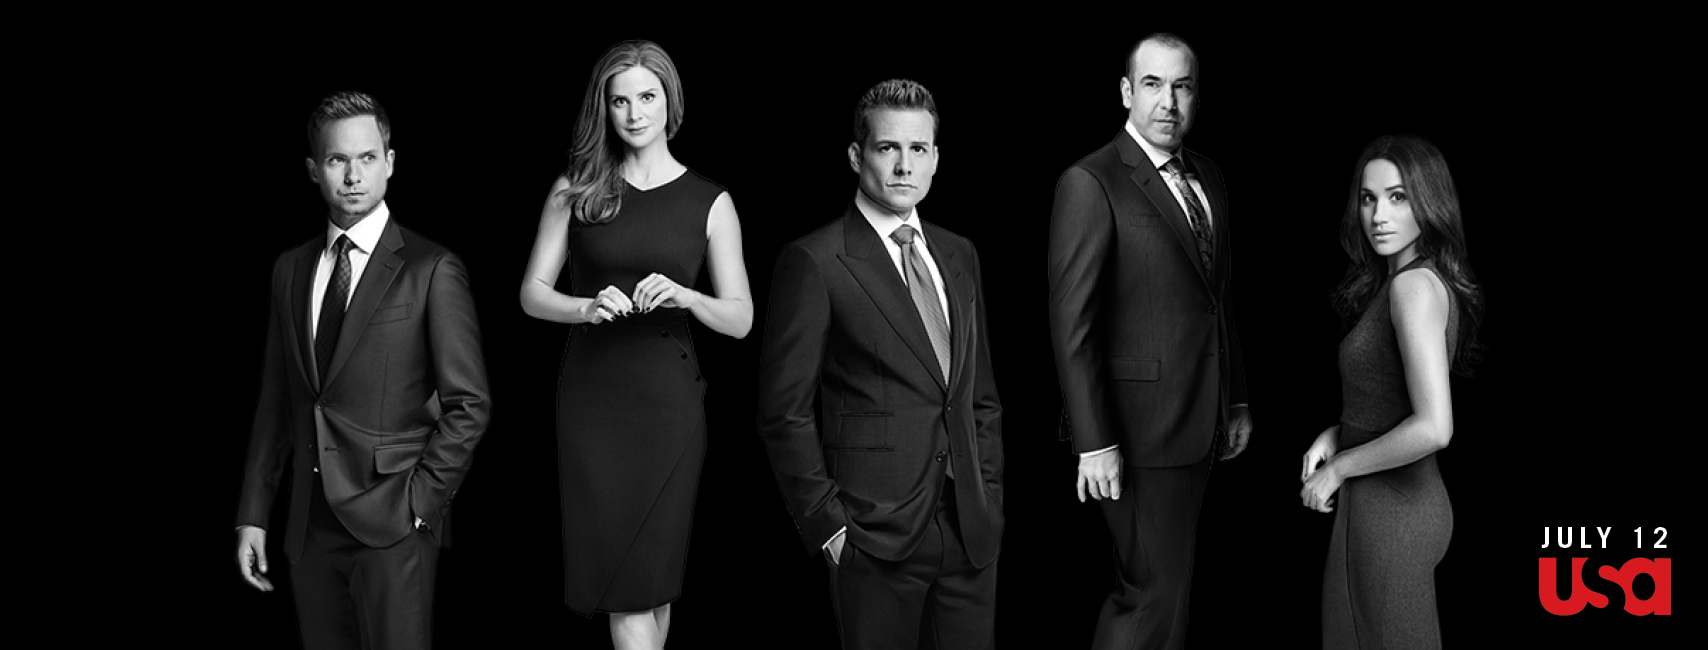 Suits: 5 TV shows to watch if you loved Suits | TV & Radio | Showbiz & TV |  Express.co.uk